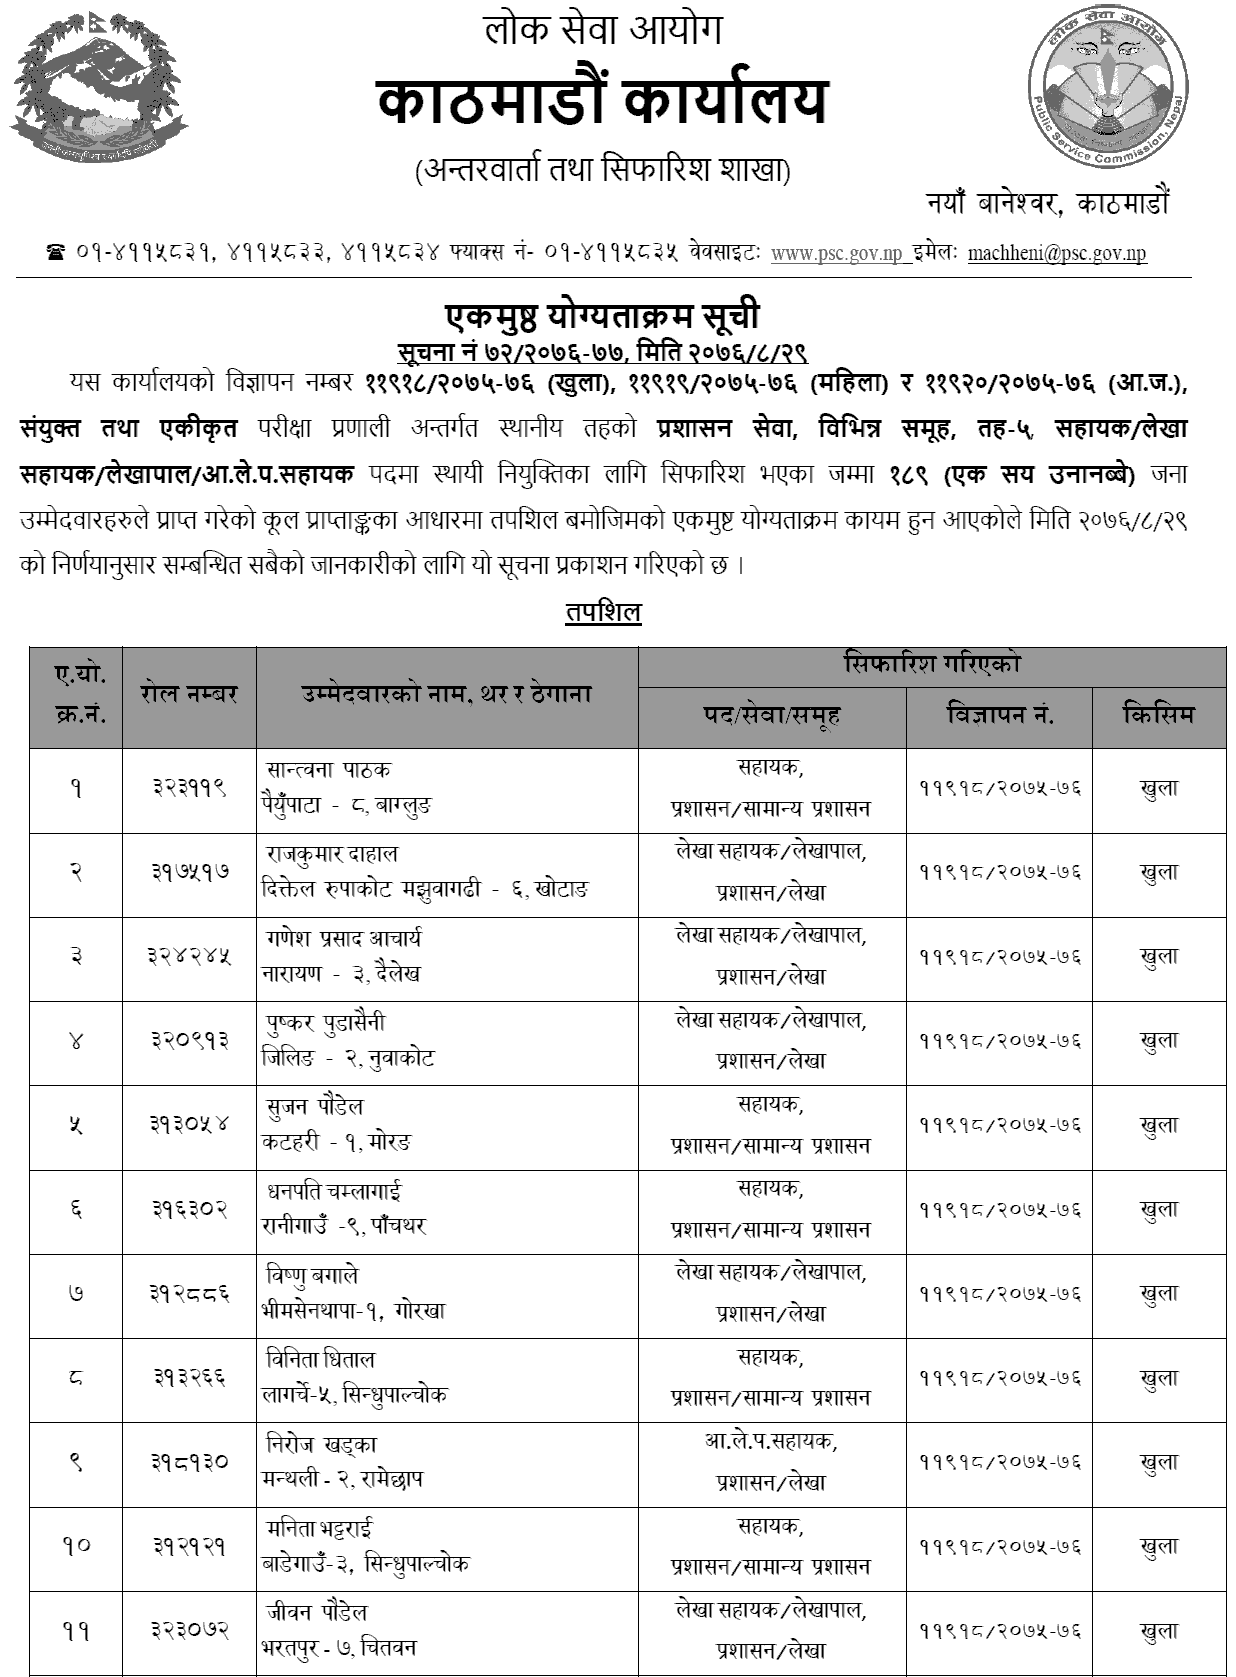 Lok Sewa Aayog Kathmandu Local Level 5th Assistant Final Result and Recommendation